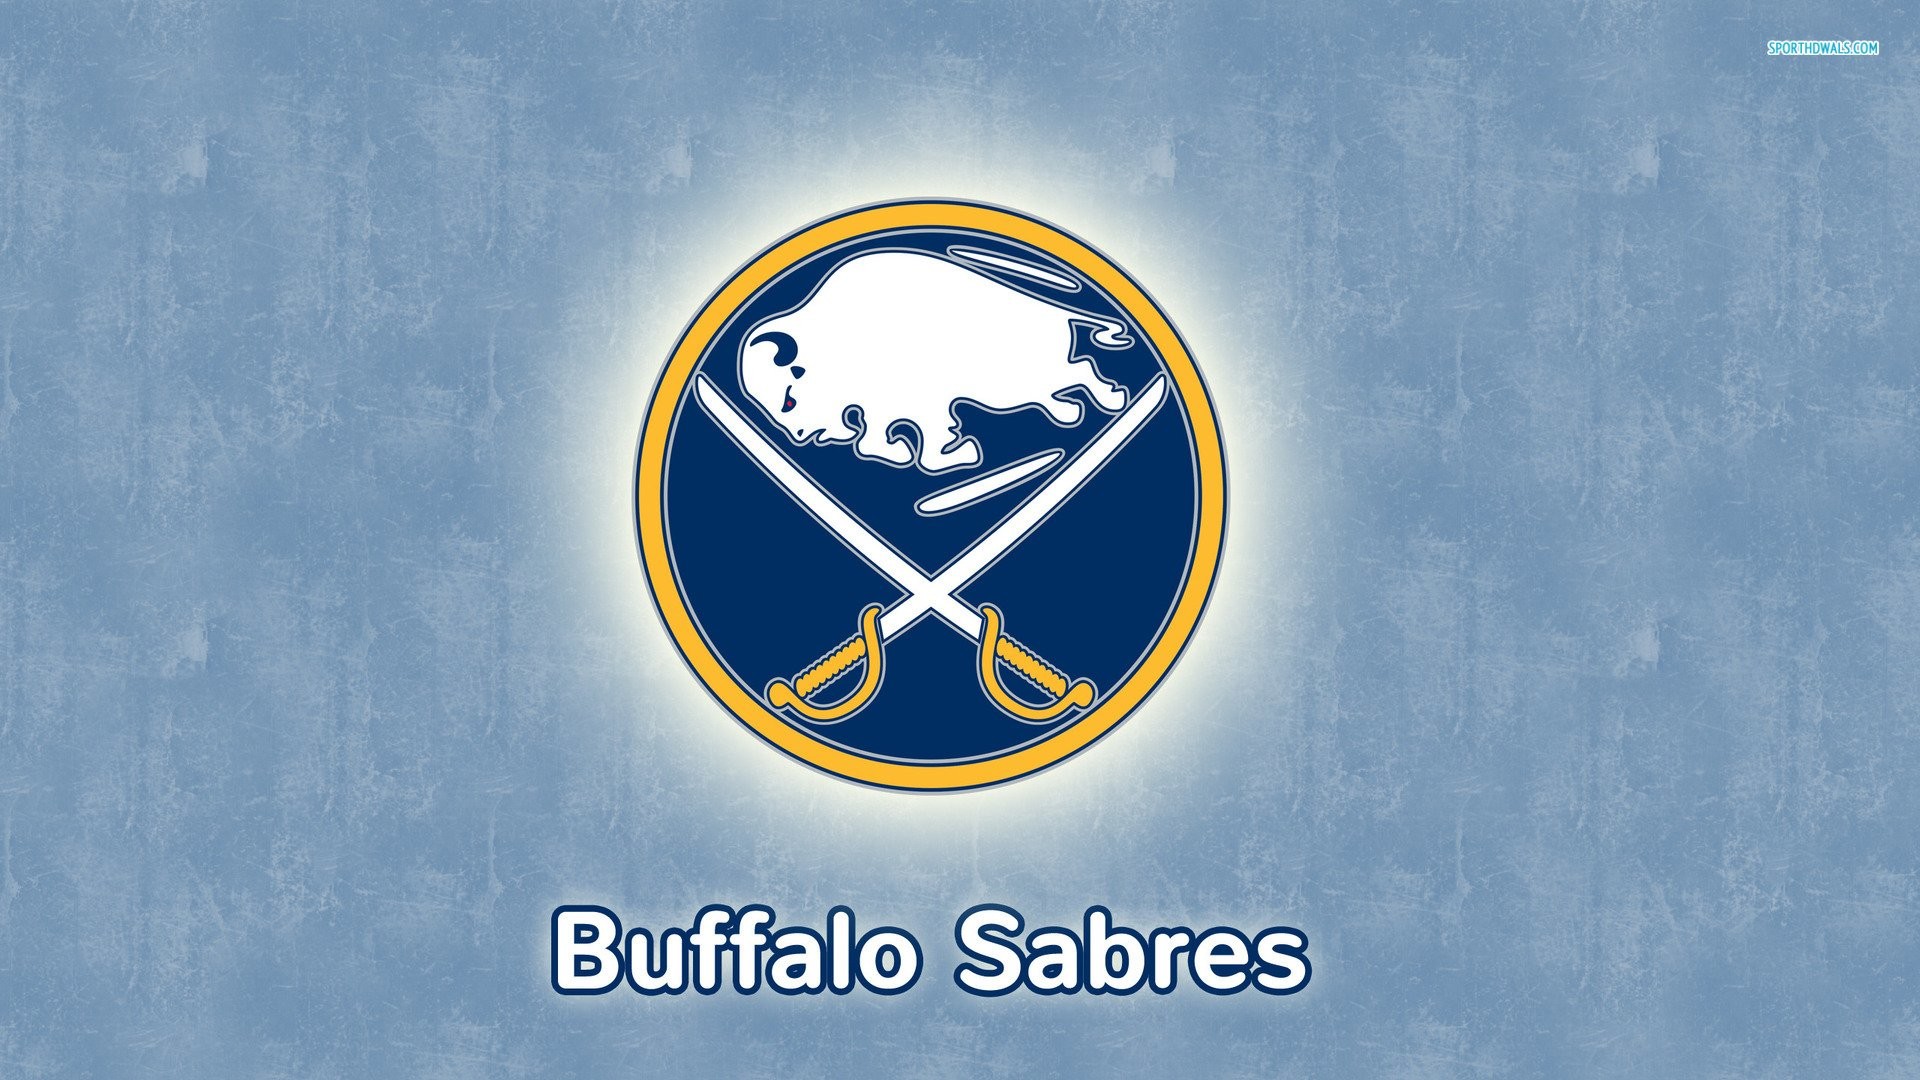 2023 Buffalo Sabres wallpaper – Pro Sports Backgrounds